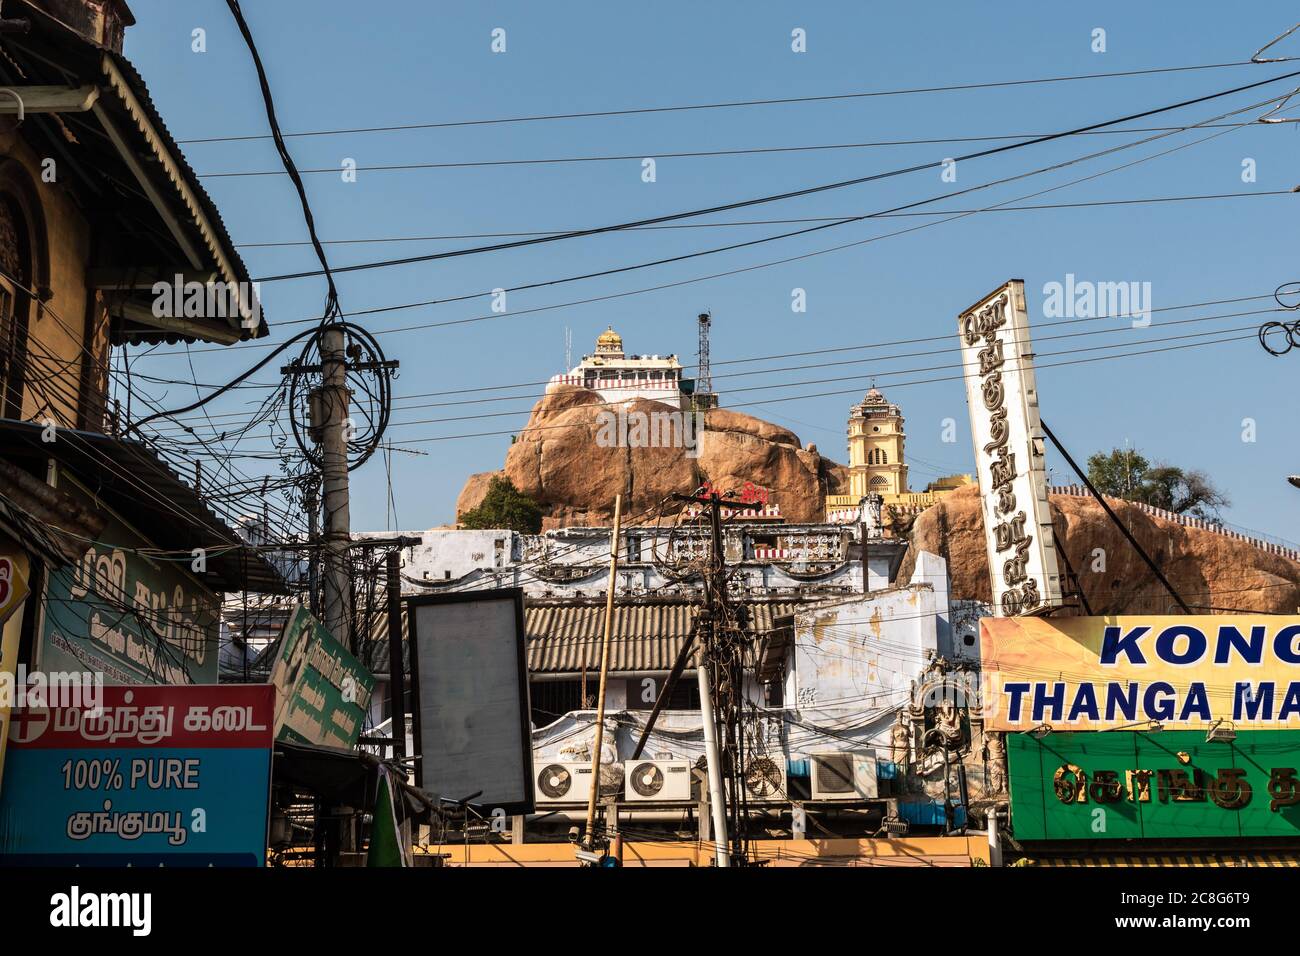 Trichy, Tamil Nadu, India - February 2020: The ancient Rock Fort temple on a rocky outcrop towering over a market in the city of Tiruchirappalli. Stock Photo